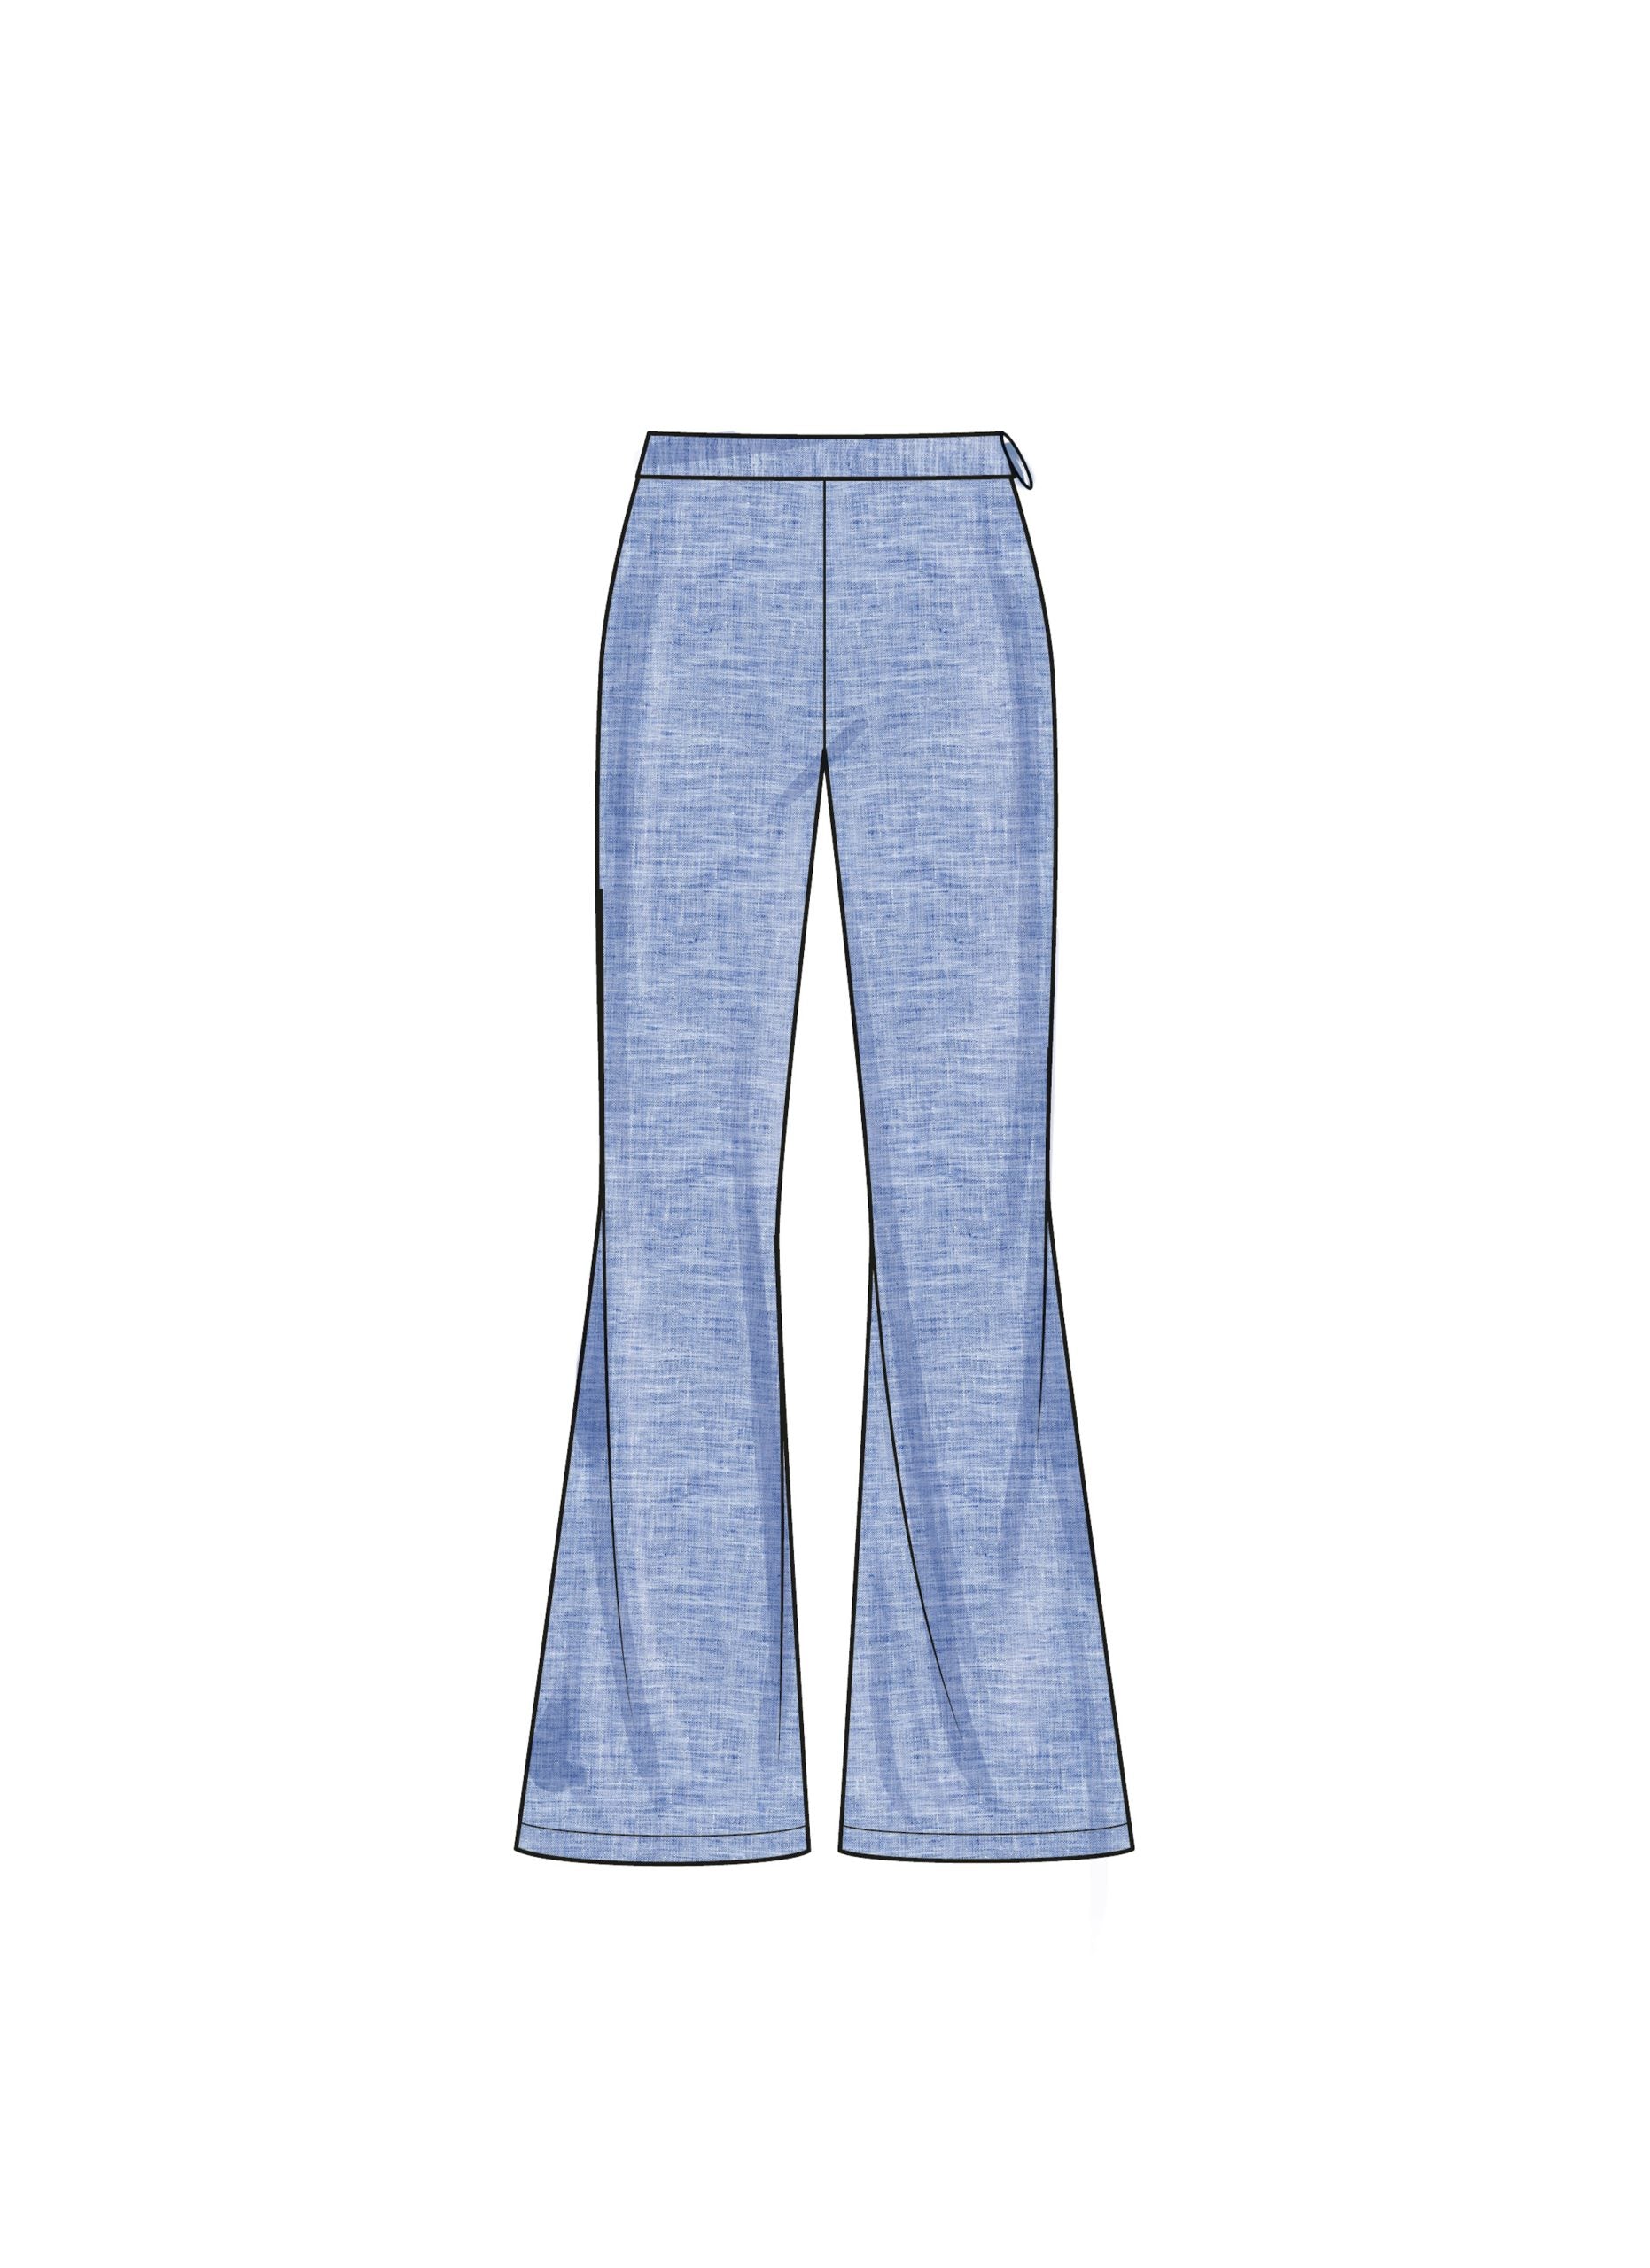 Simplicity Child/Teen Top & Trousers S9863